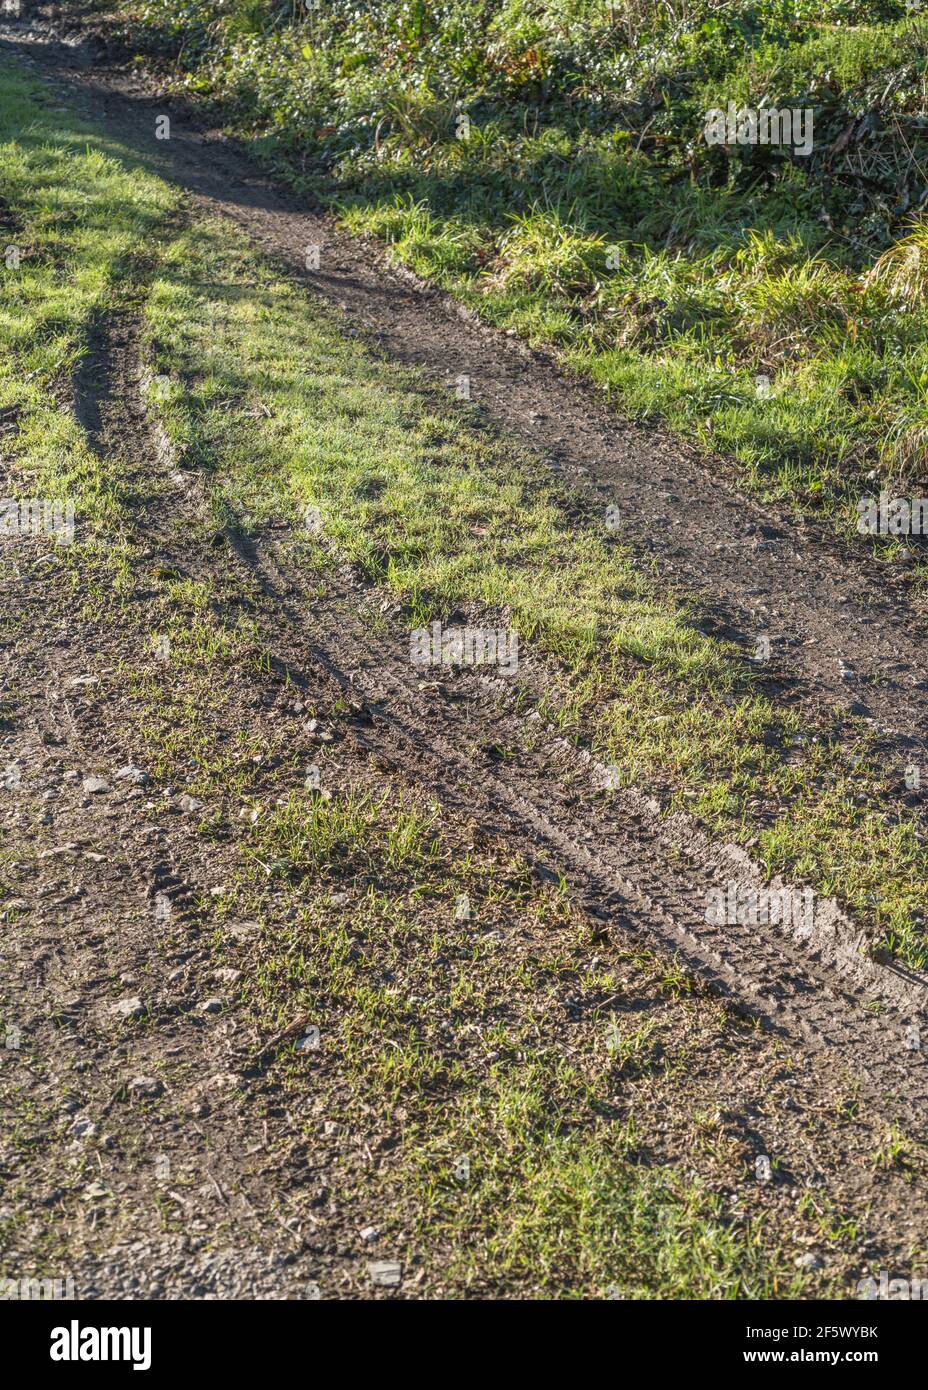 Tyre mark on wet grass of country track. Metaphor round the bend, changing course, change of direction, keep off the grass, muddy track. Stock Photo